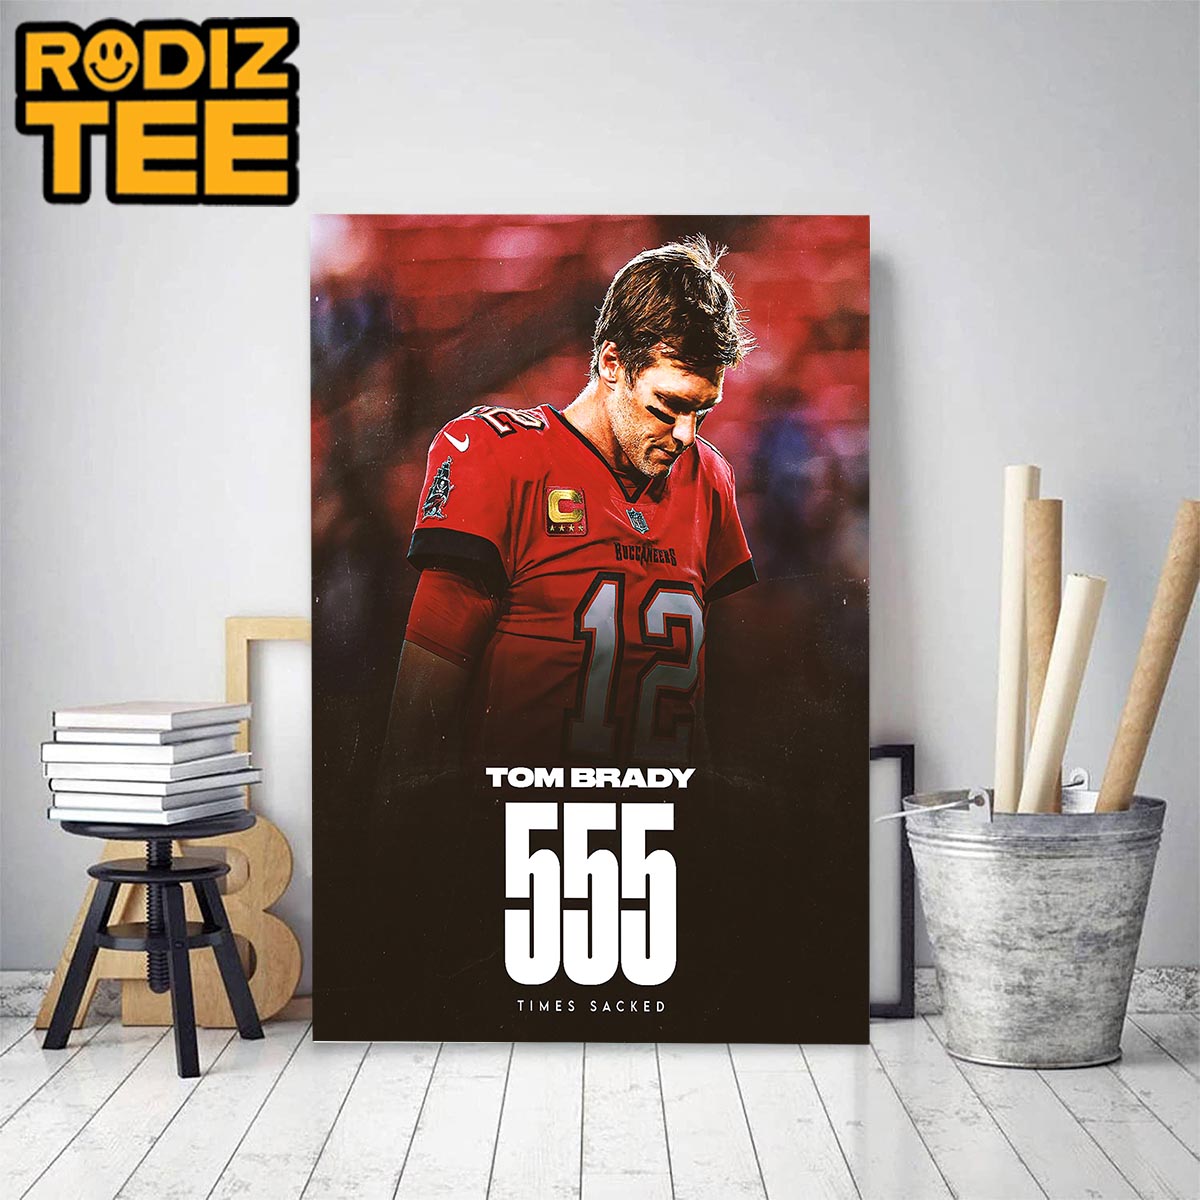 Tom Brady 555 Times Sacked The Most Sacked QB In NFL History Classic Decoration Poster Canvas